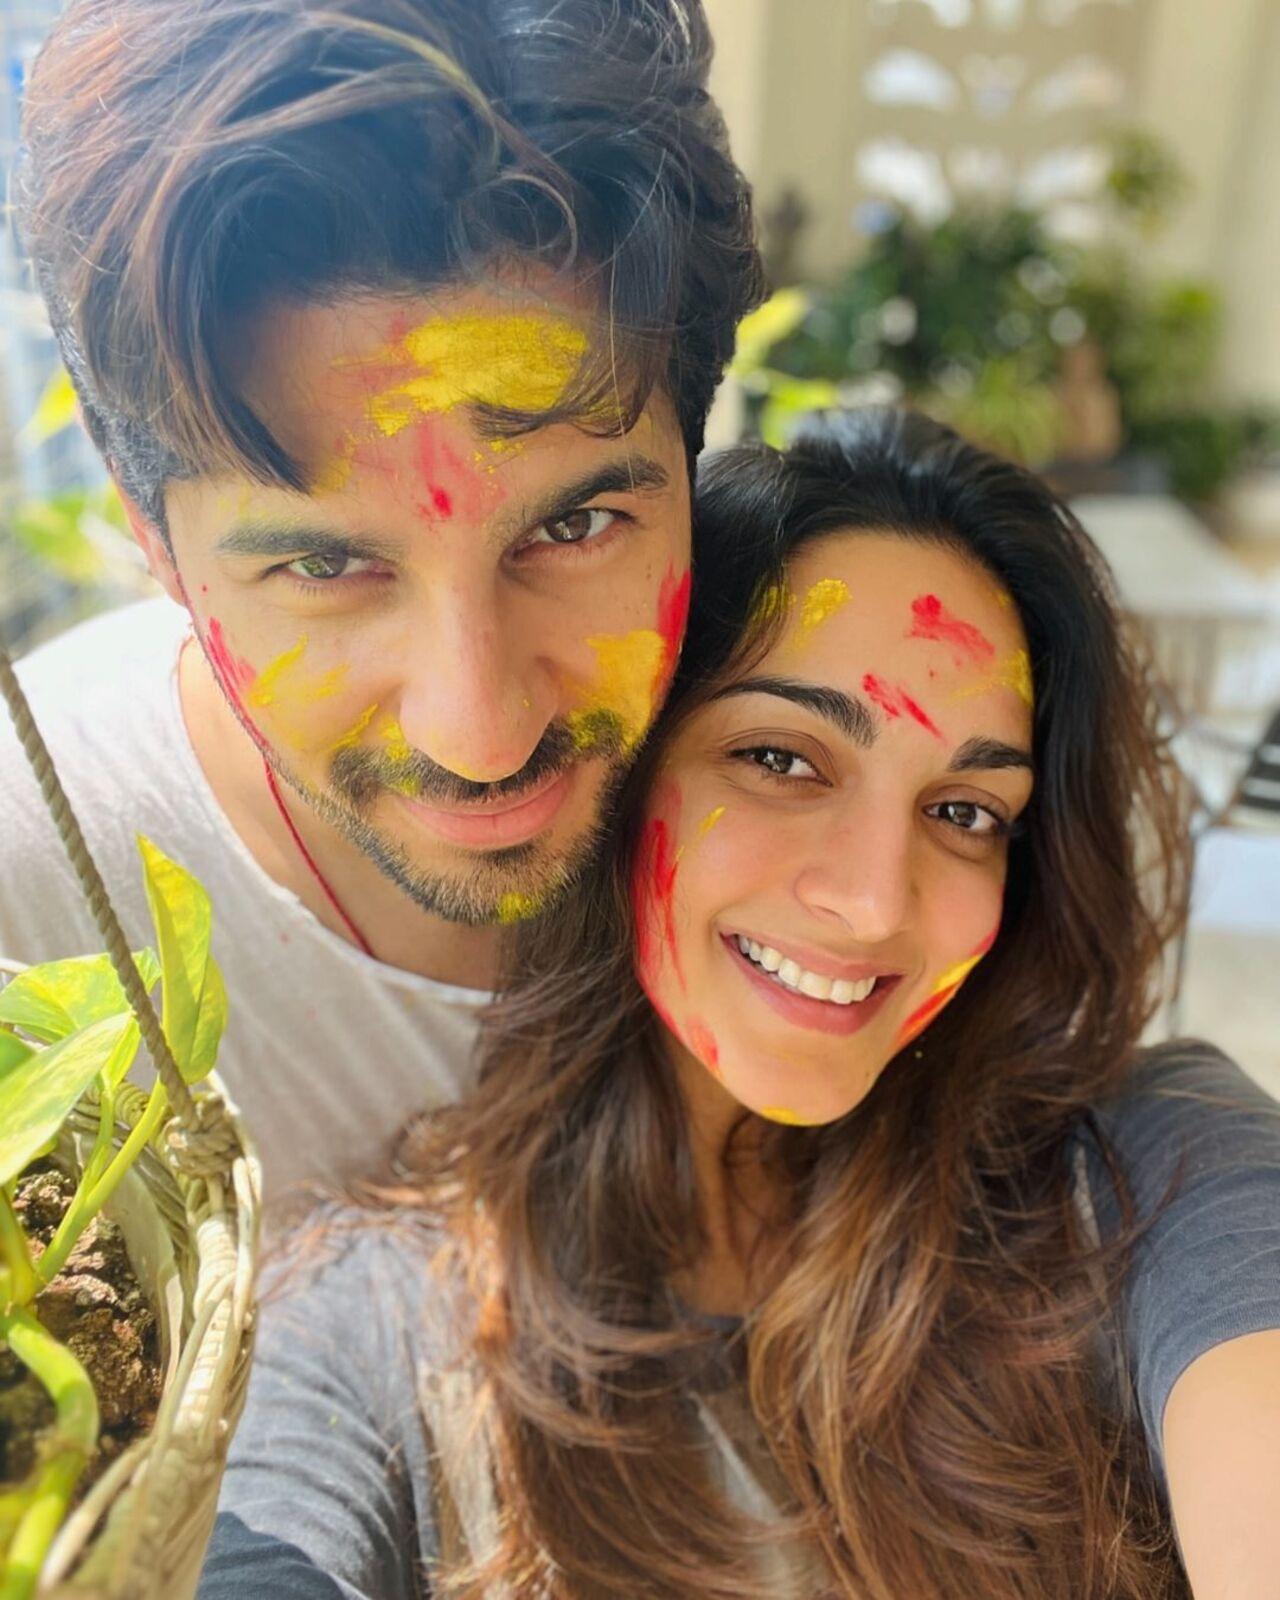 Kiara Advani and Sidharth Malhotra celebrate their second Holi together after their marriage last year